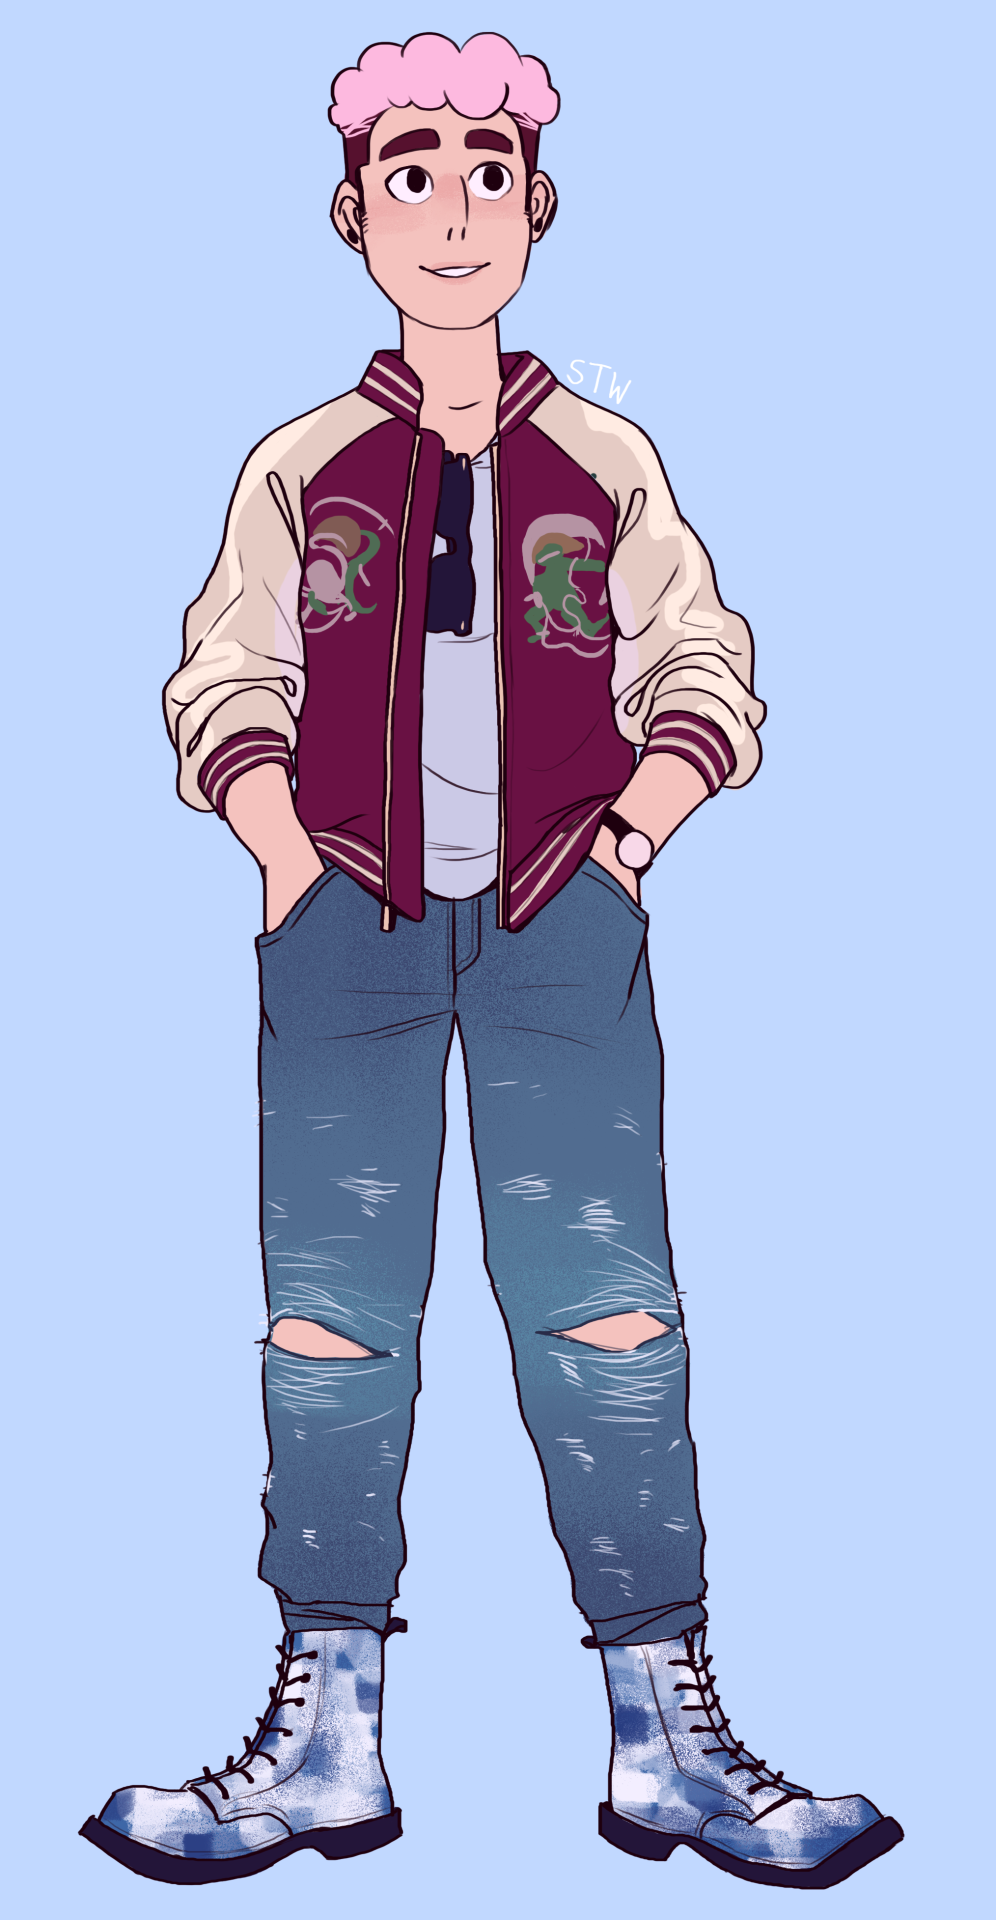 I drew (older teenager) Steven wearing the outfit Zach wore in this vine!
I feel compelled to tag @thatsthat24 because it’s thanks to him that vine exists